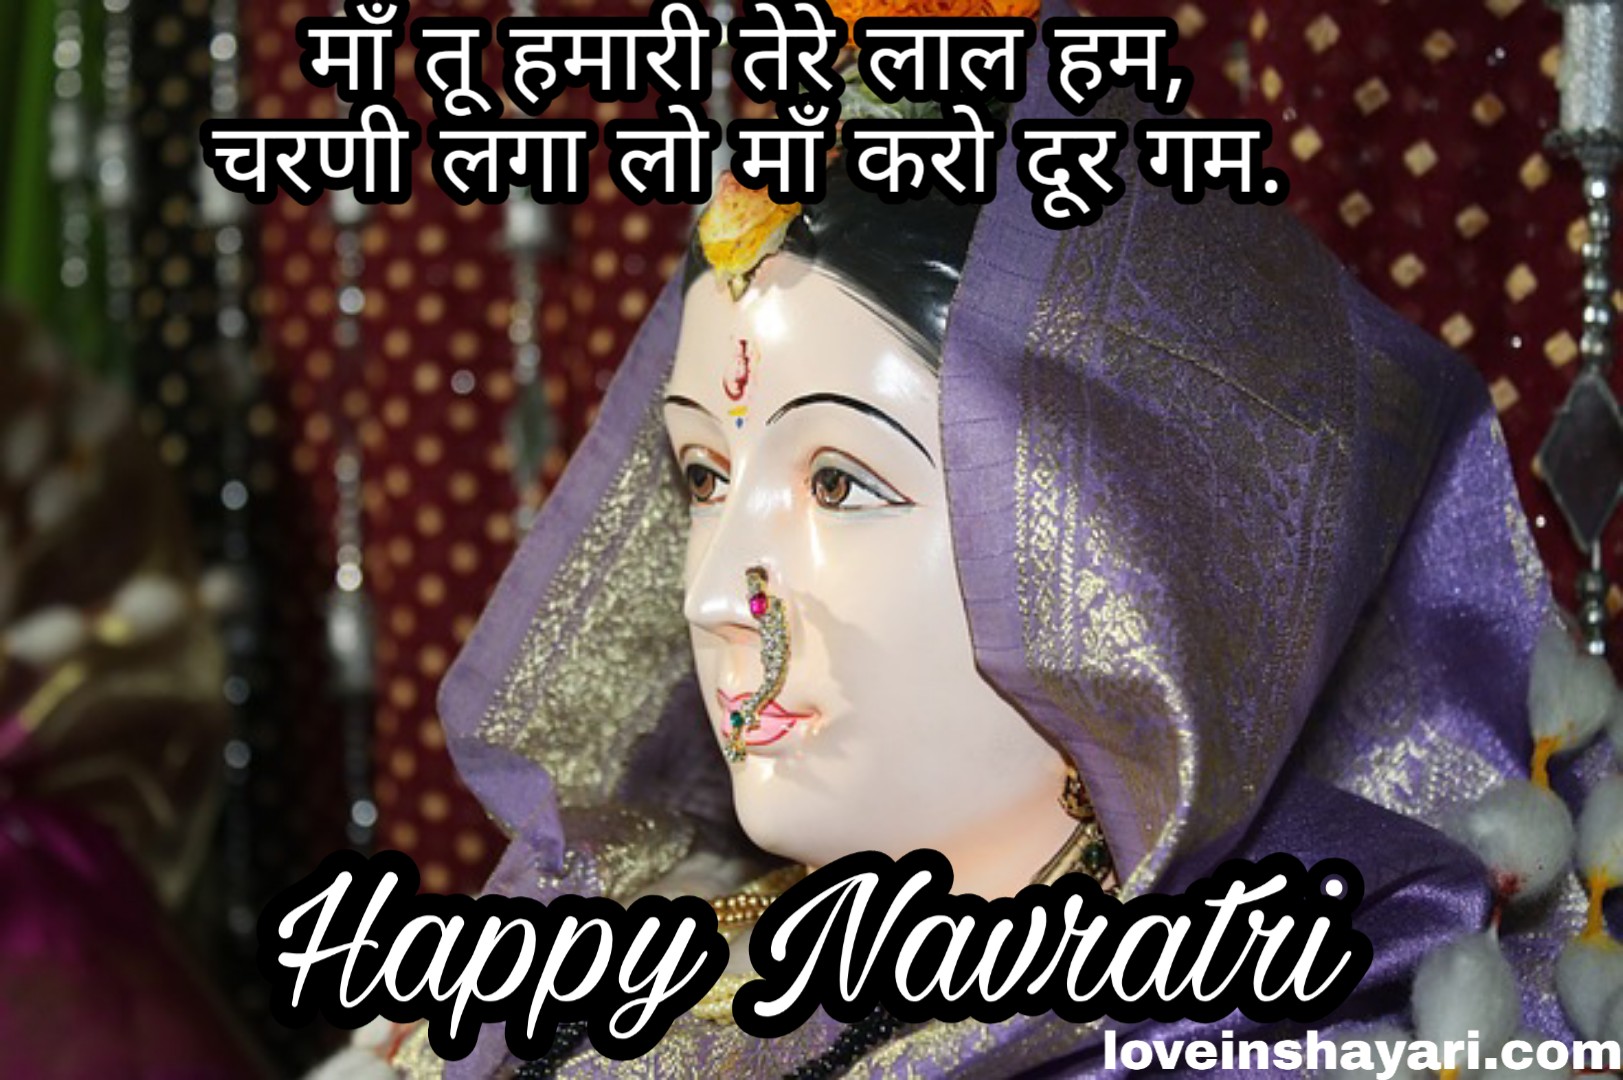 Navratri wishes message quotes